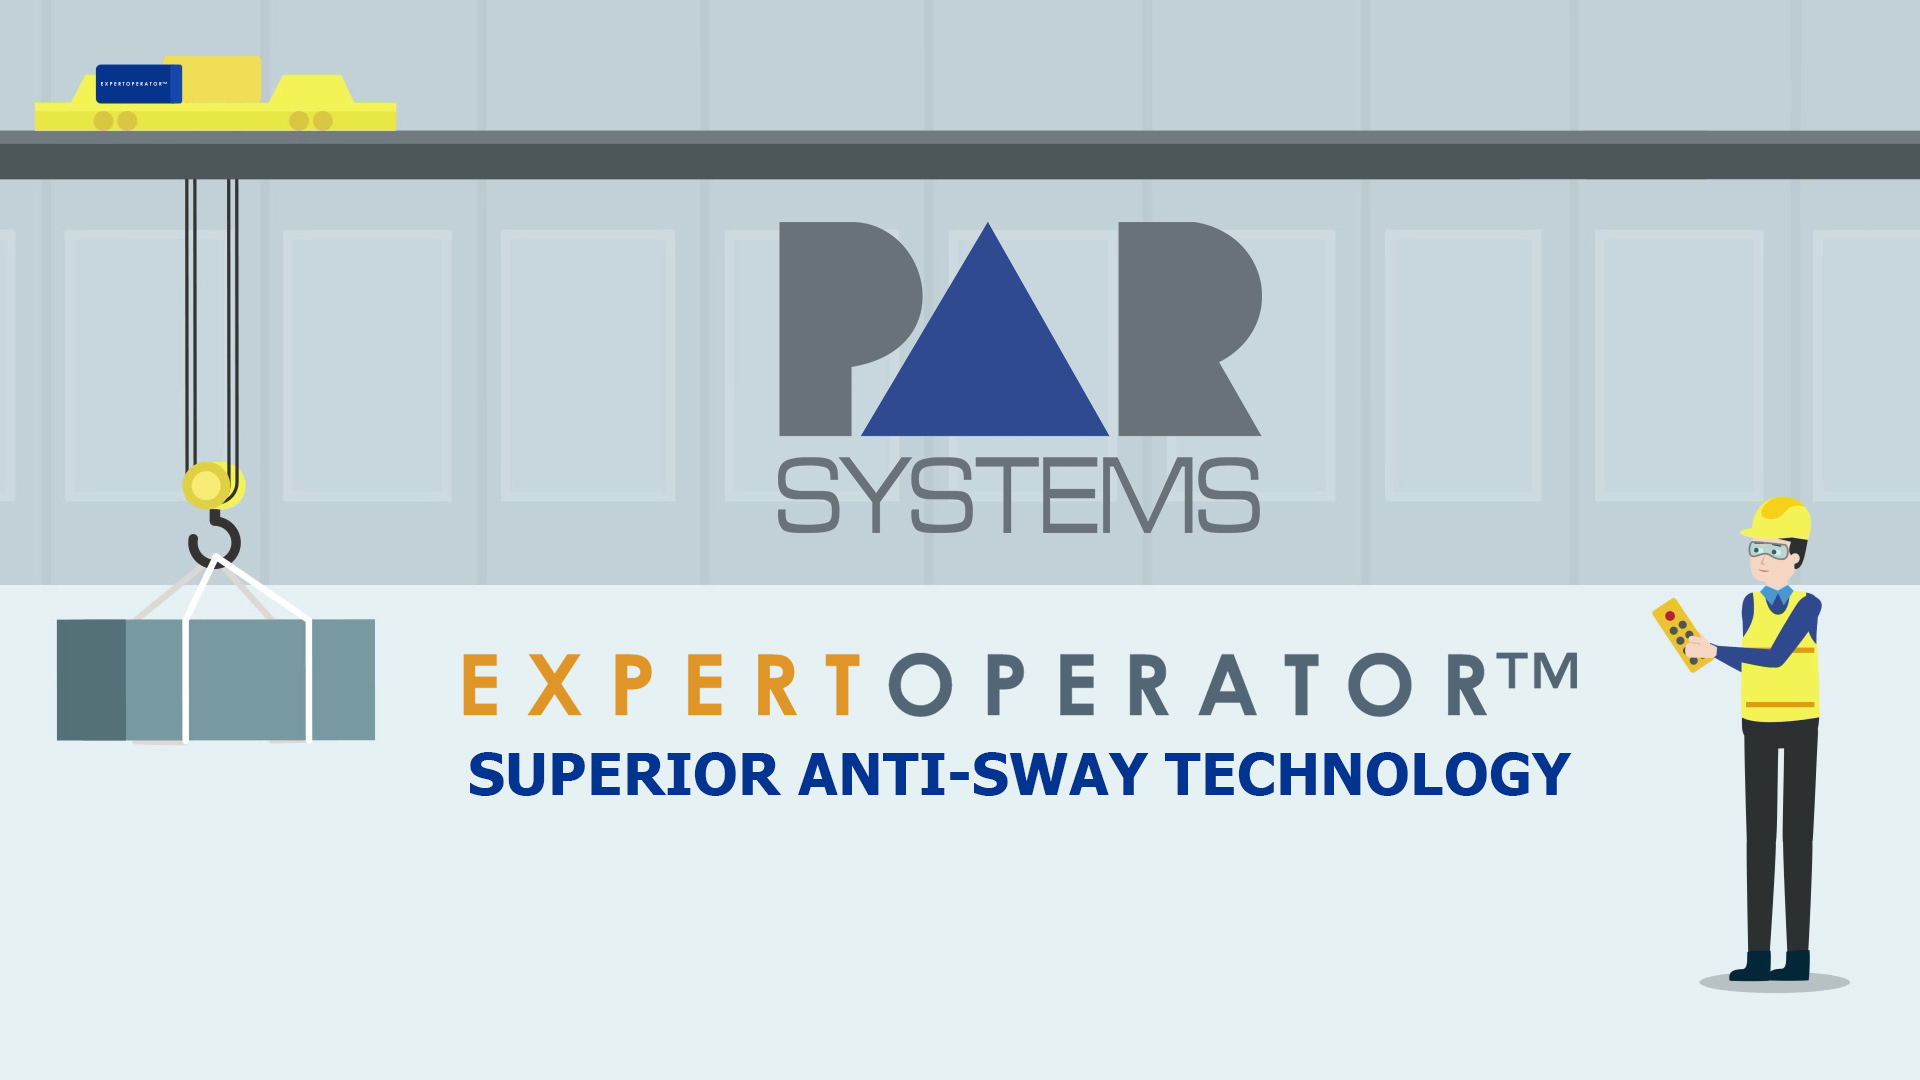 PaR Systems Animated Explainer Product Video